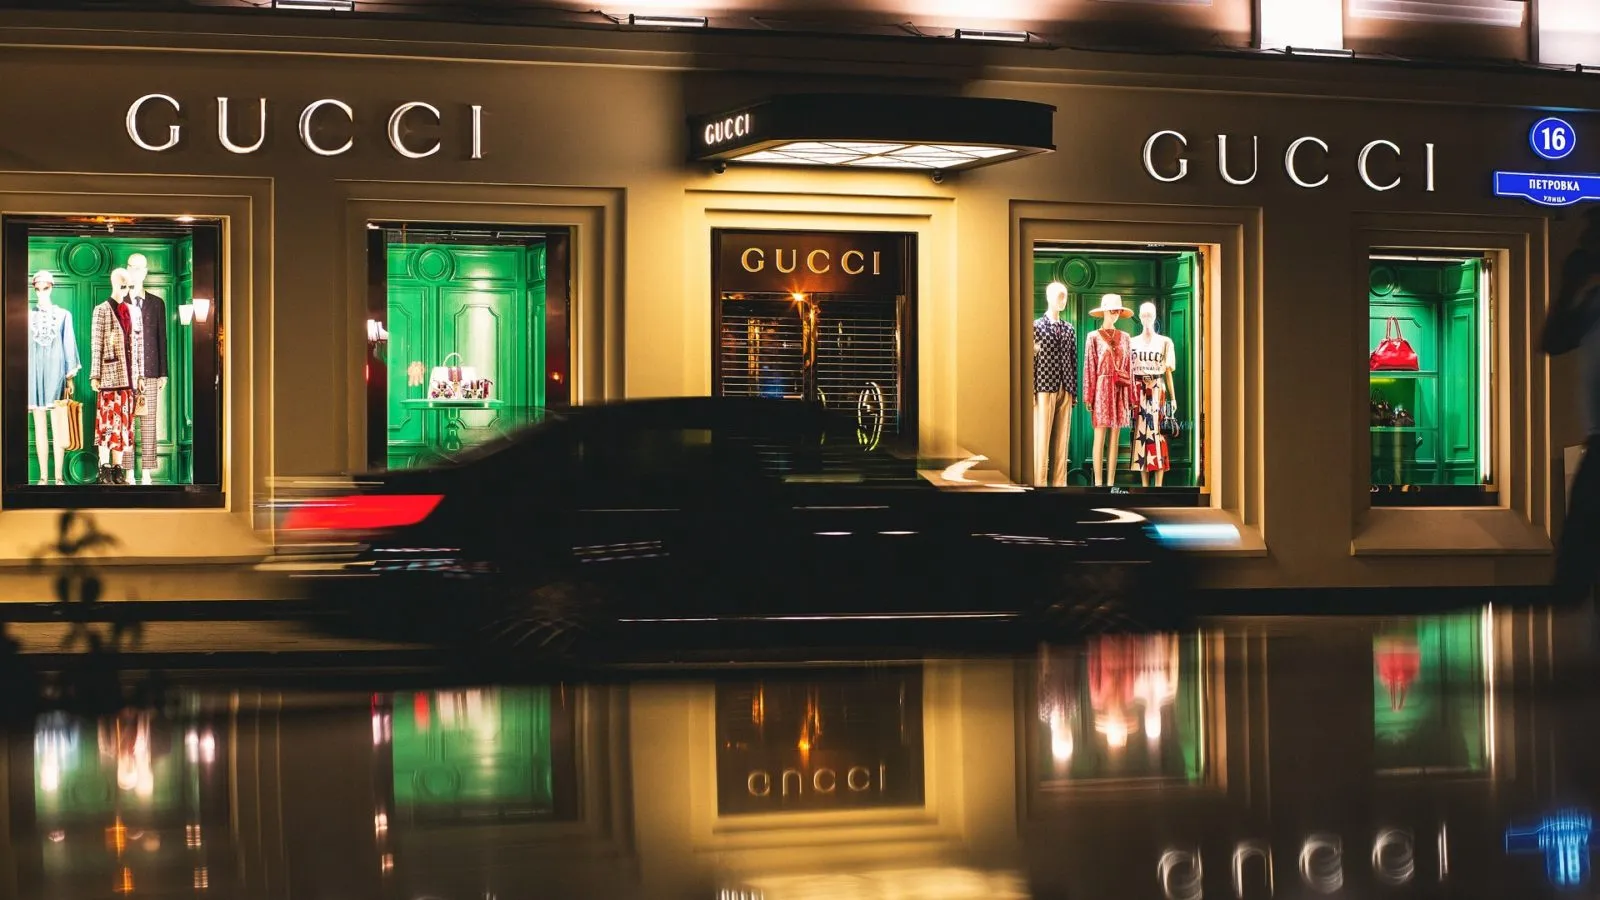 Gucci, has announced that it will accept payments in cryptocurrencies in some of its stores in the US from the end of this month.